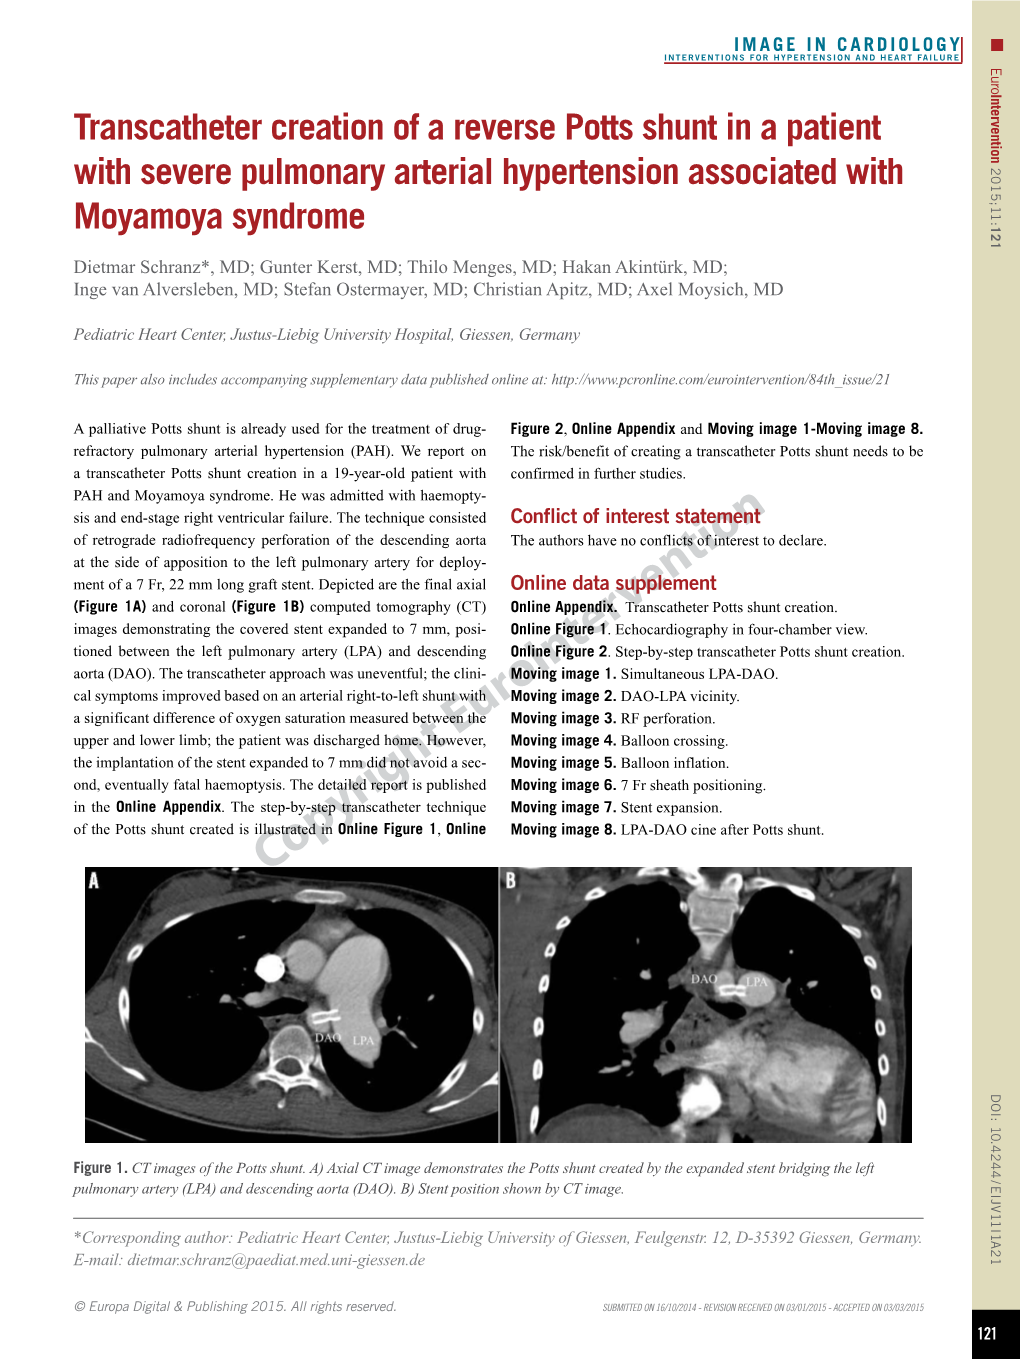 Transcatheter Creation of a Reverse Potts Shunt in a Patient with Severe Pulmonary Arterial Hypertension Associated with 2015;11: 121 Moyamoya Syndrome